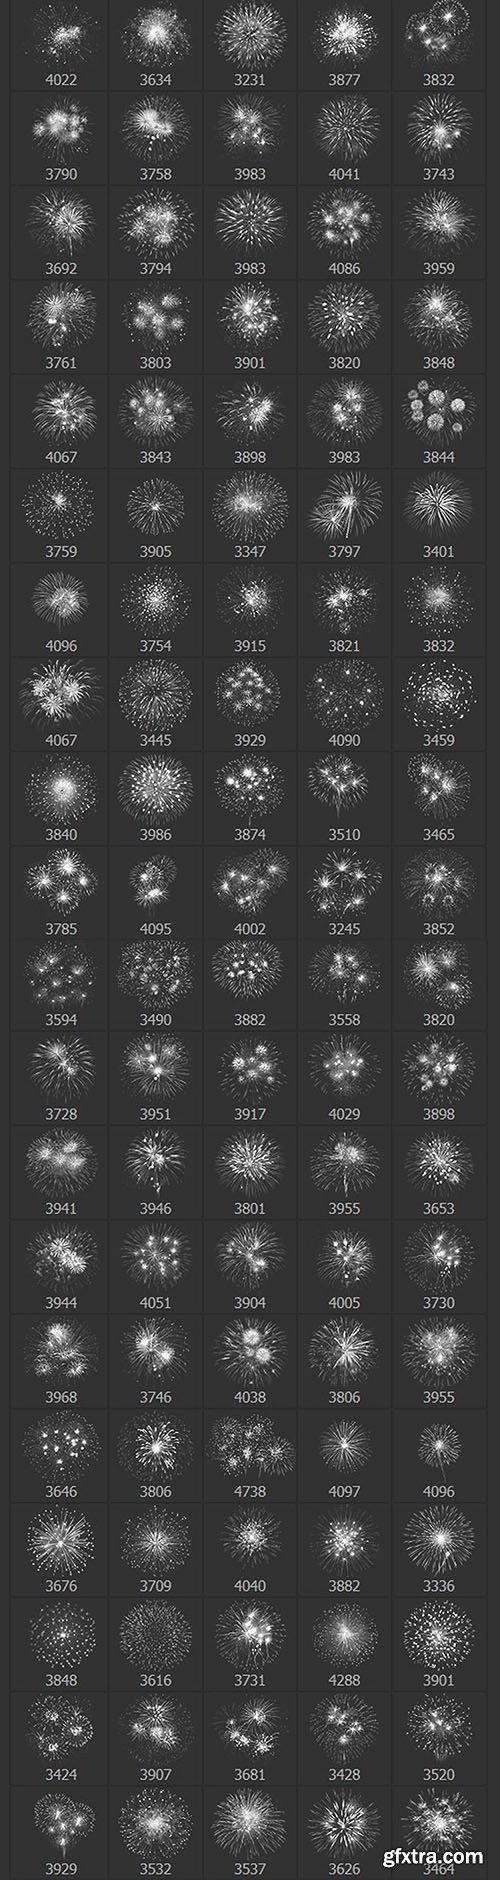 Fireworks Brushes Pack for Photoshop